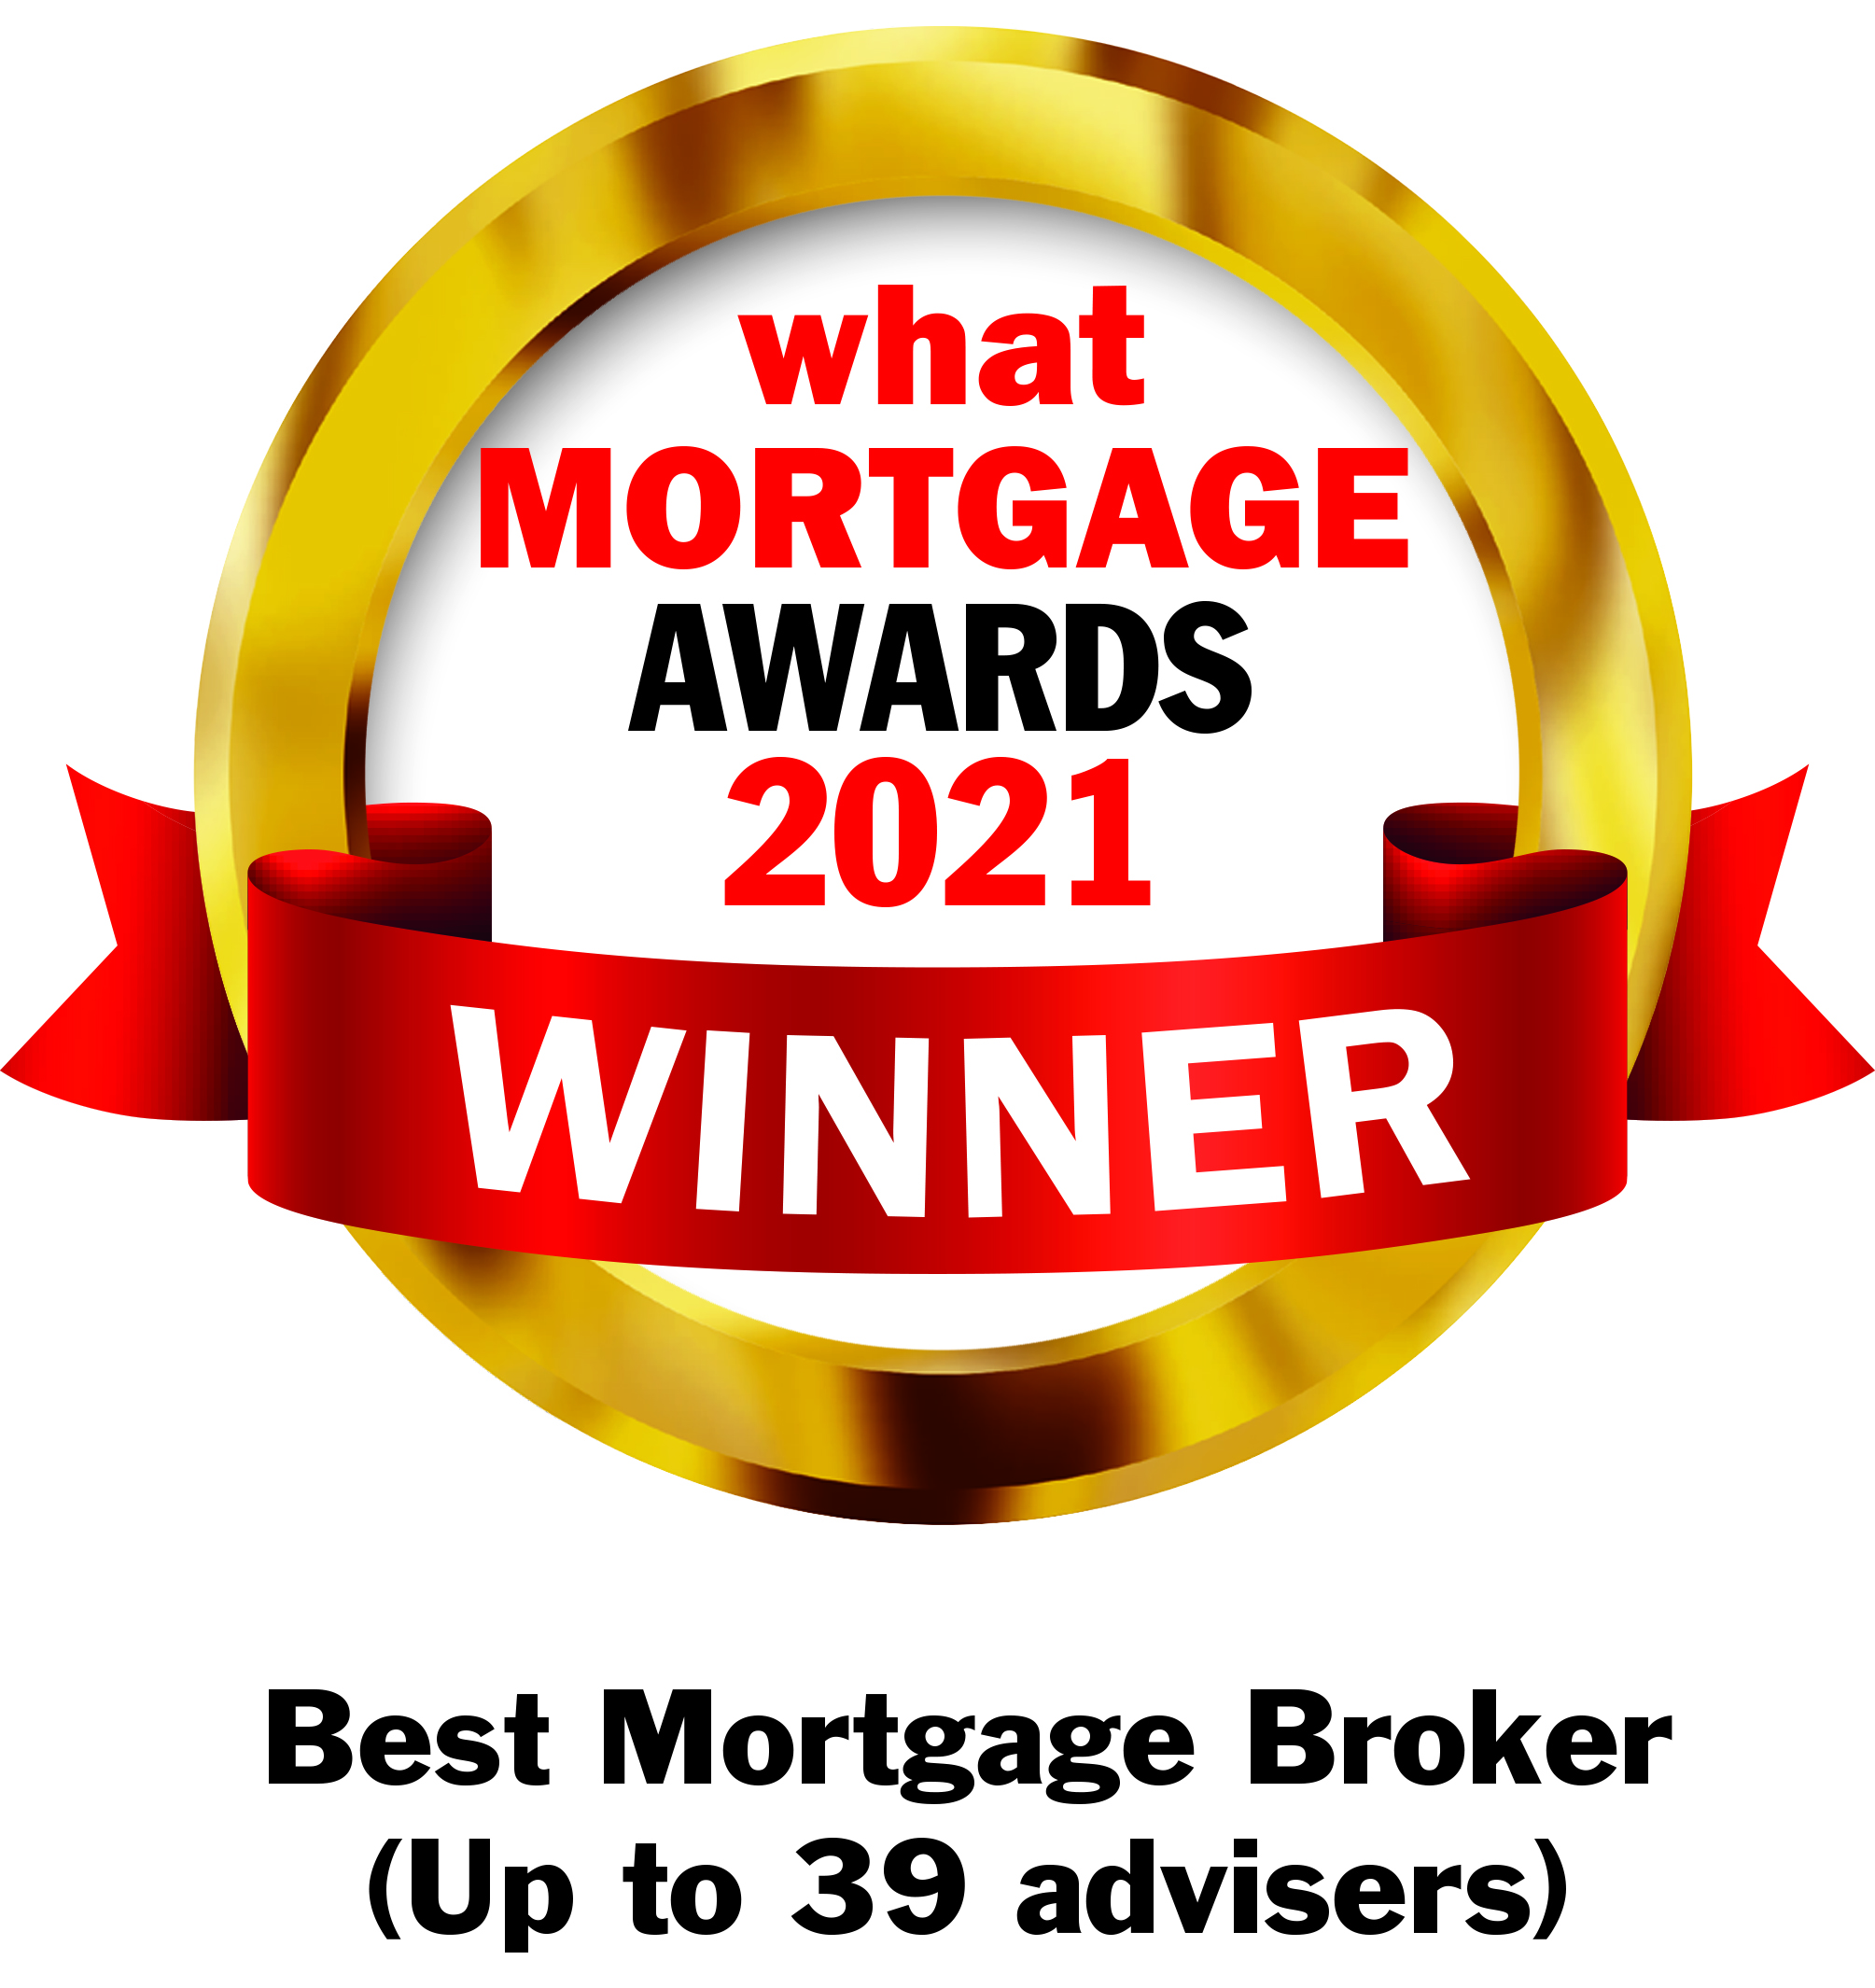 What Mortgage Awards 2021